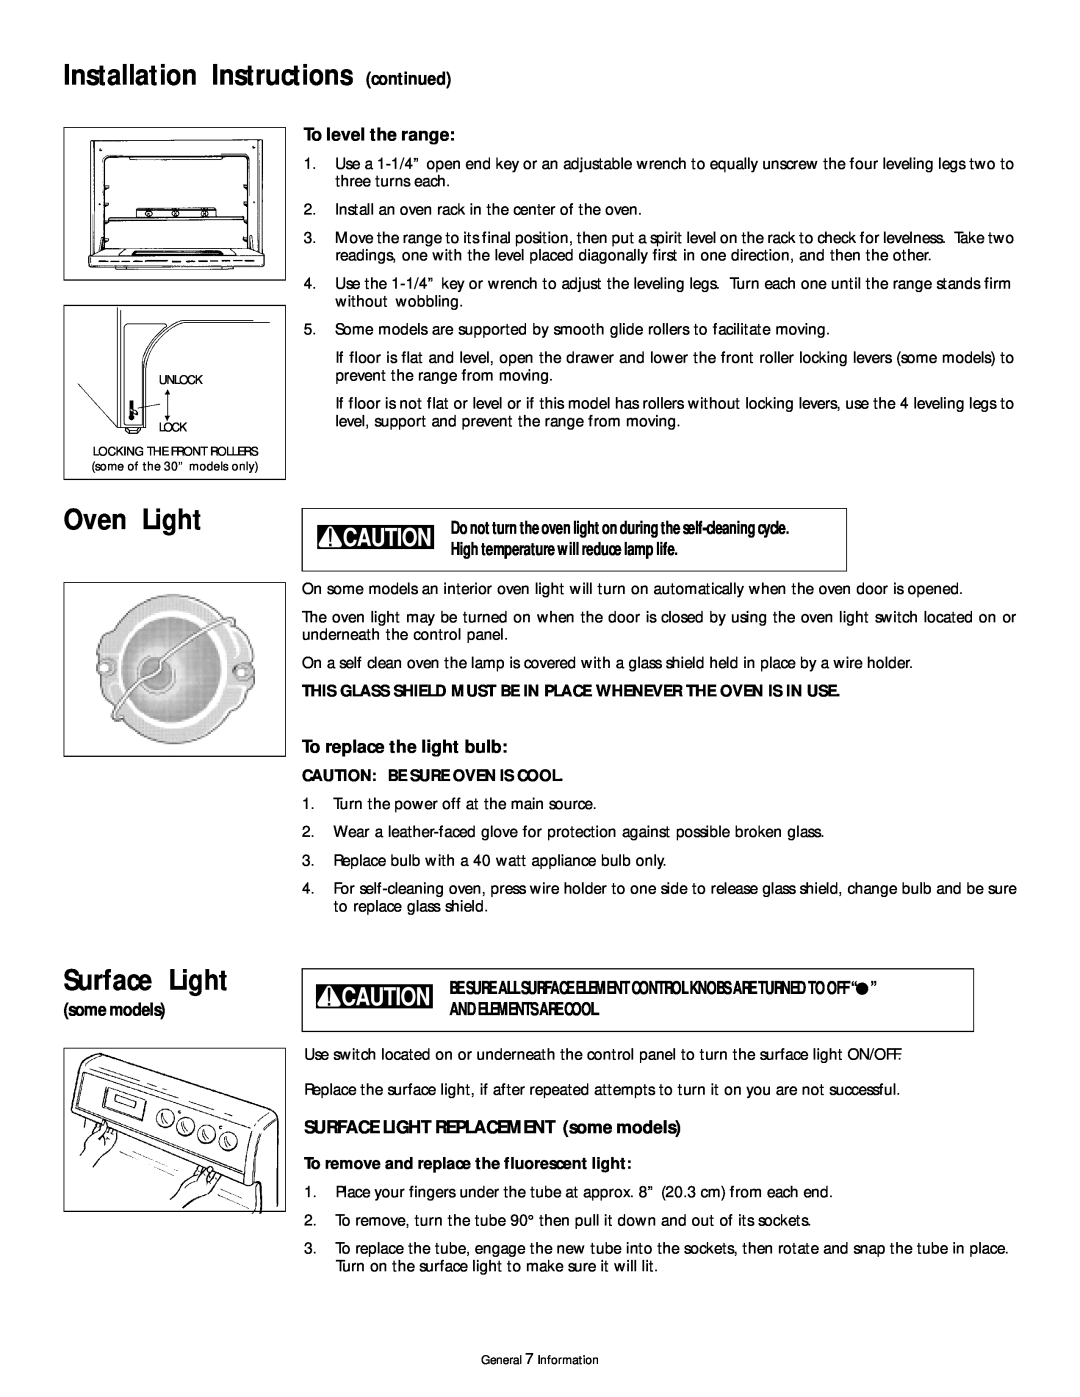 Frigidaire 318200407 manual Installation Instructions continued, Oven Light, Surface Light, To level the range, some models 